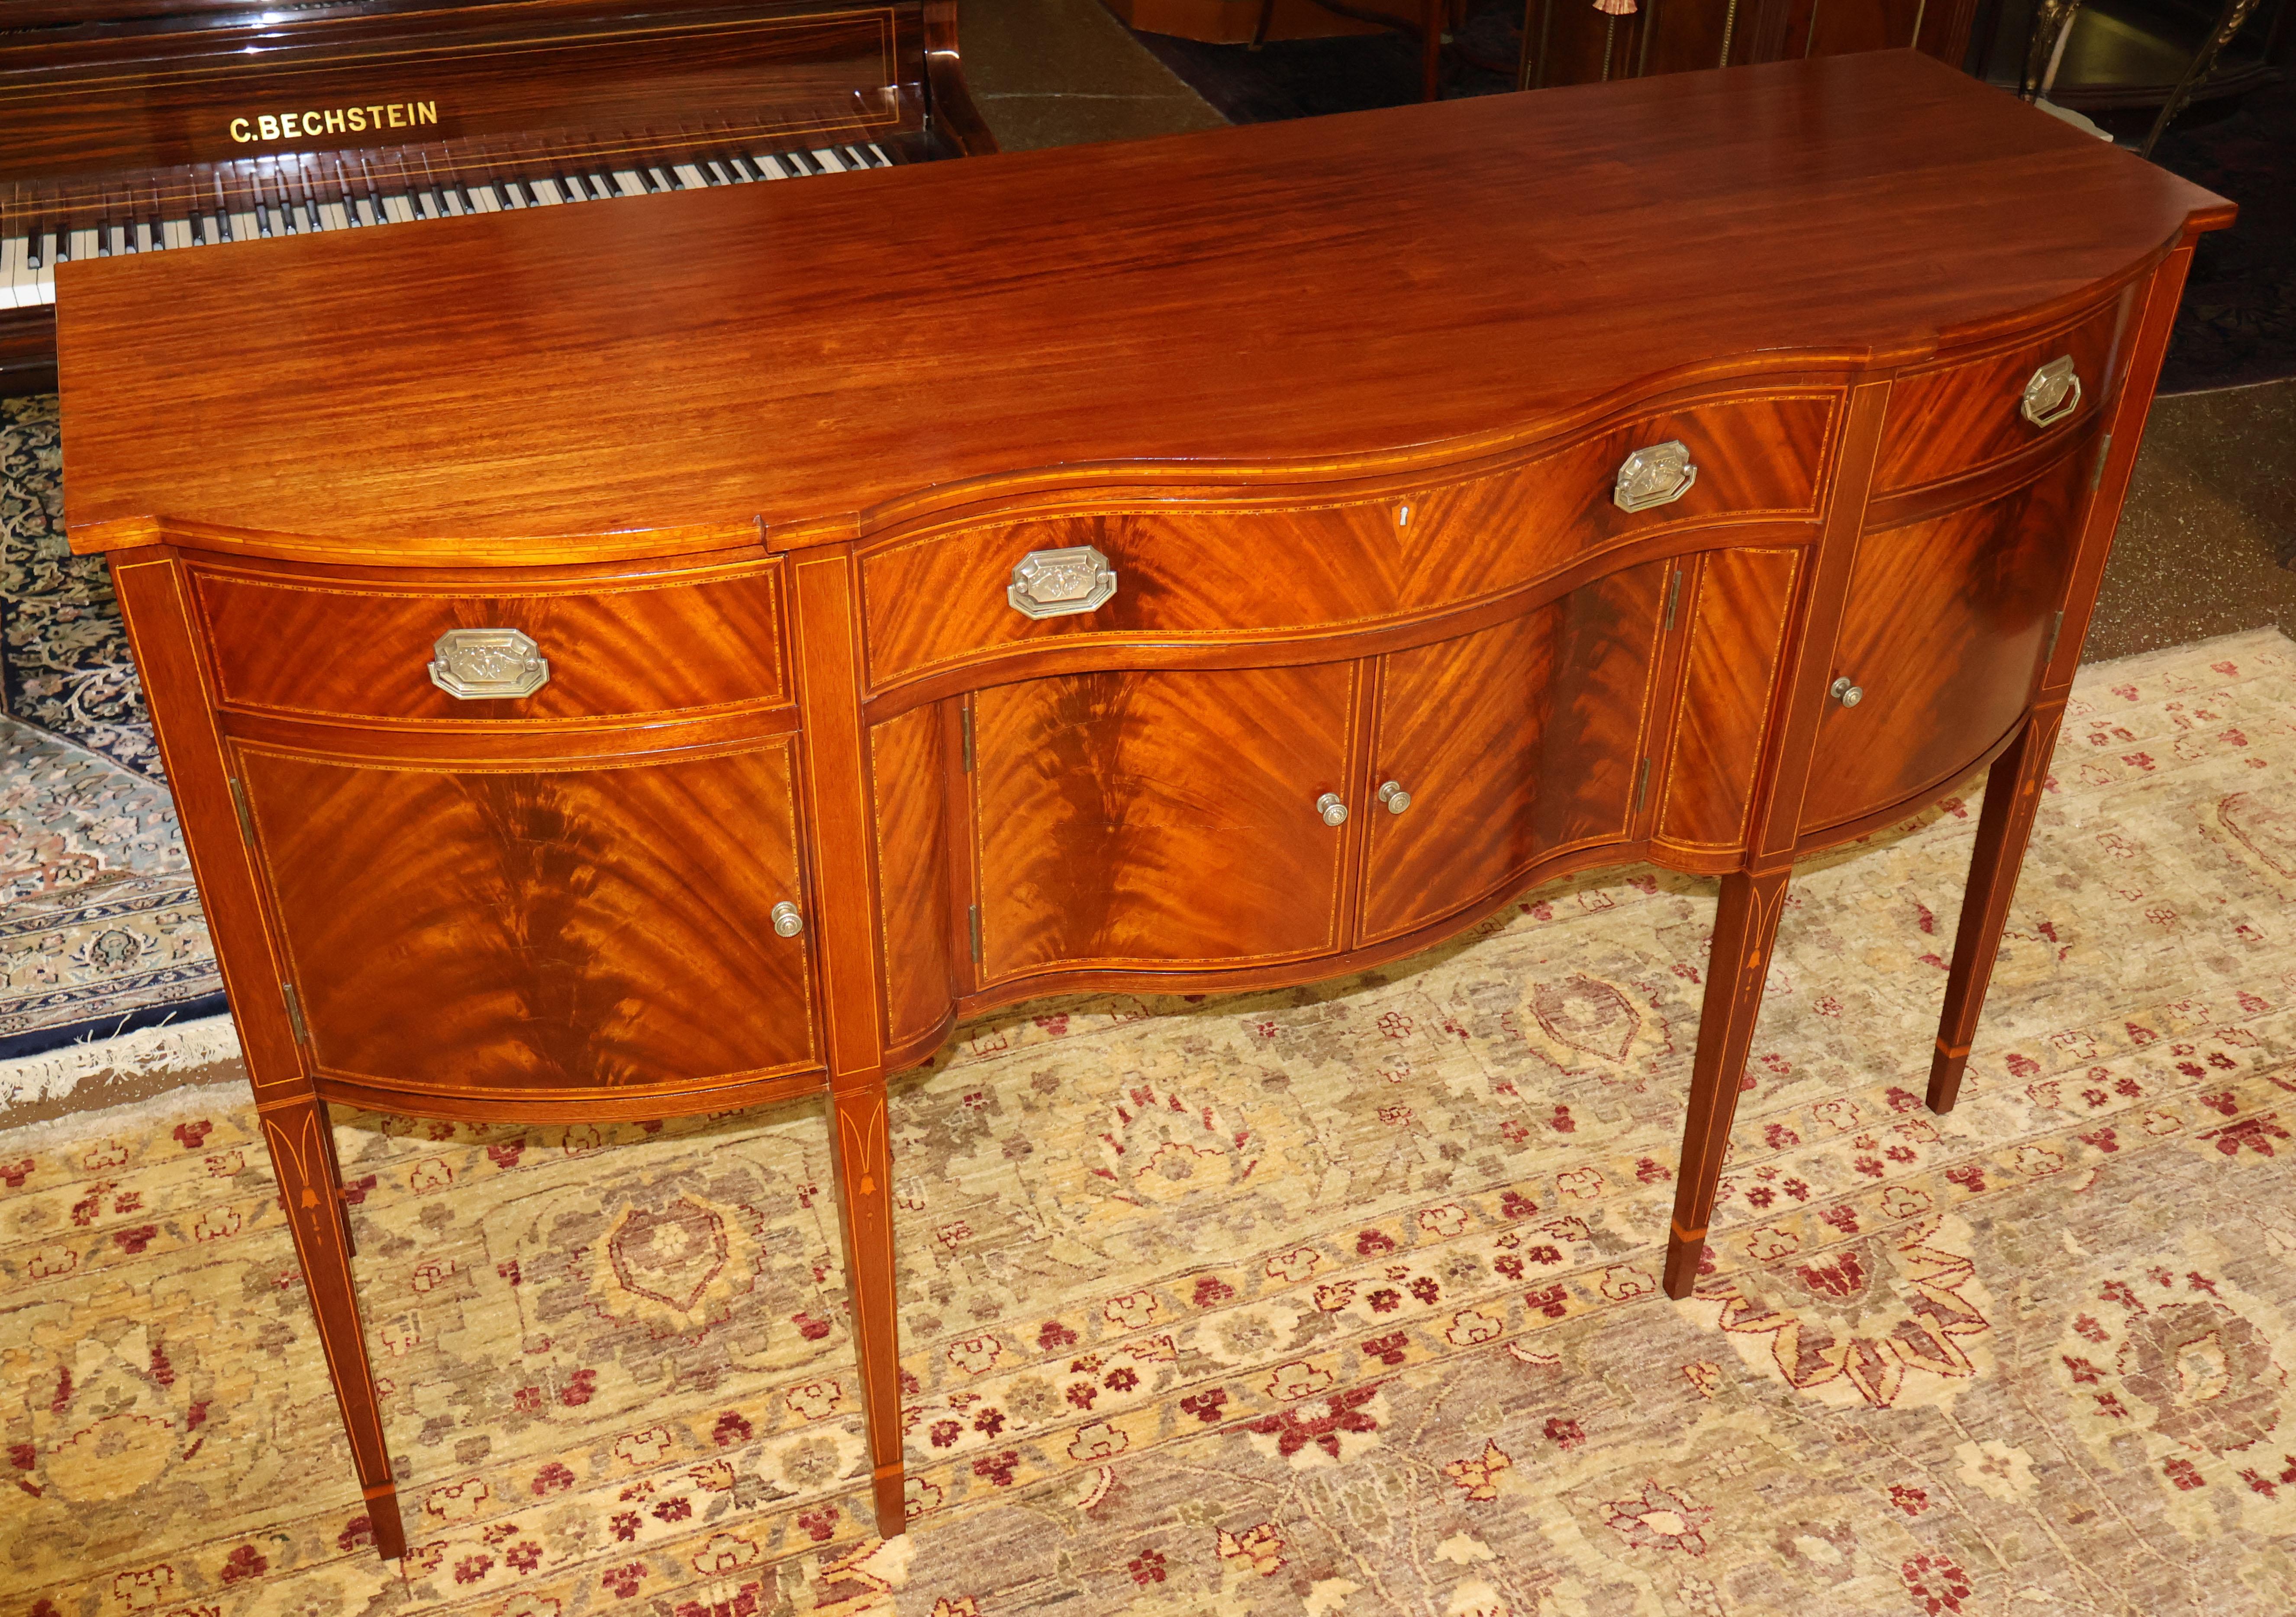 ​Early 20th Century Mahogany Hepplewhite Style Server Buffet Sideboard

Dimensions : 66